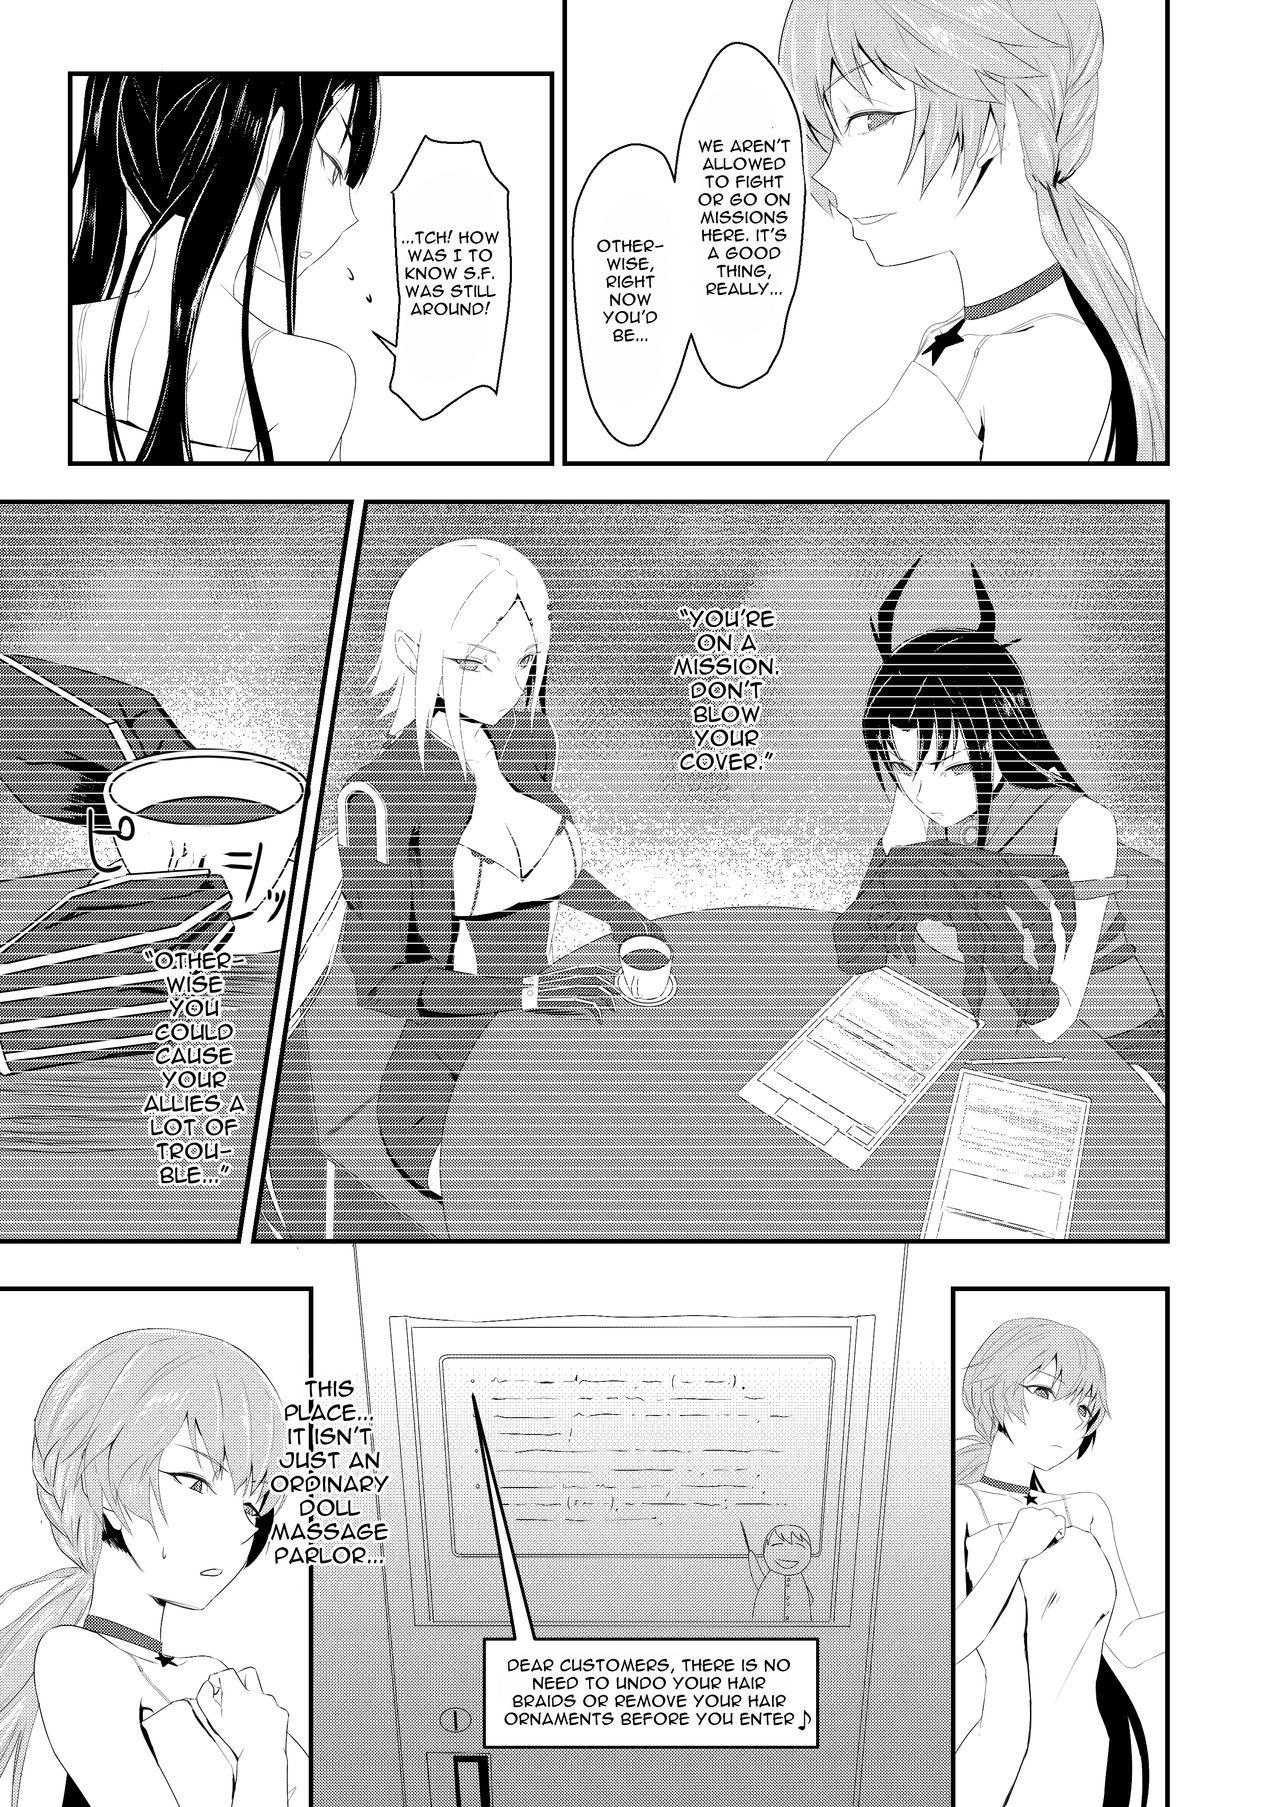 Hardcore Sex Enchou suru nara Watashi mo... | If You're Getting An Extension, Then I'll Have One Too... - Girls frontline Riding Cock - Page 5